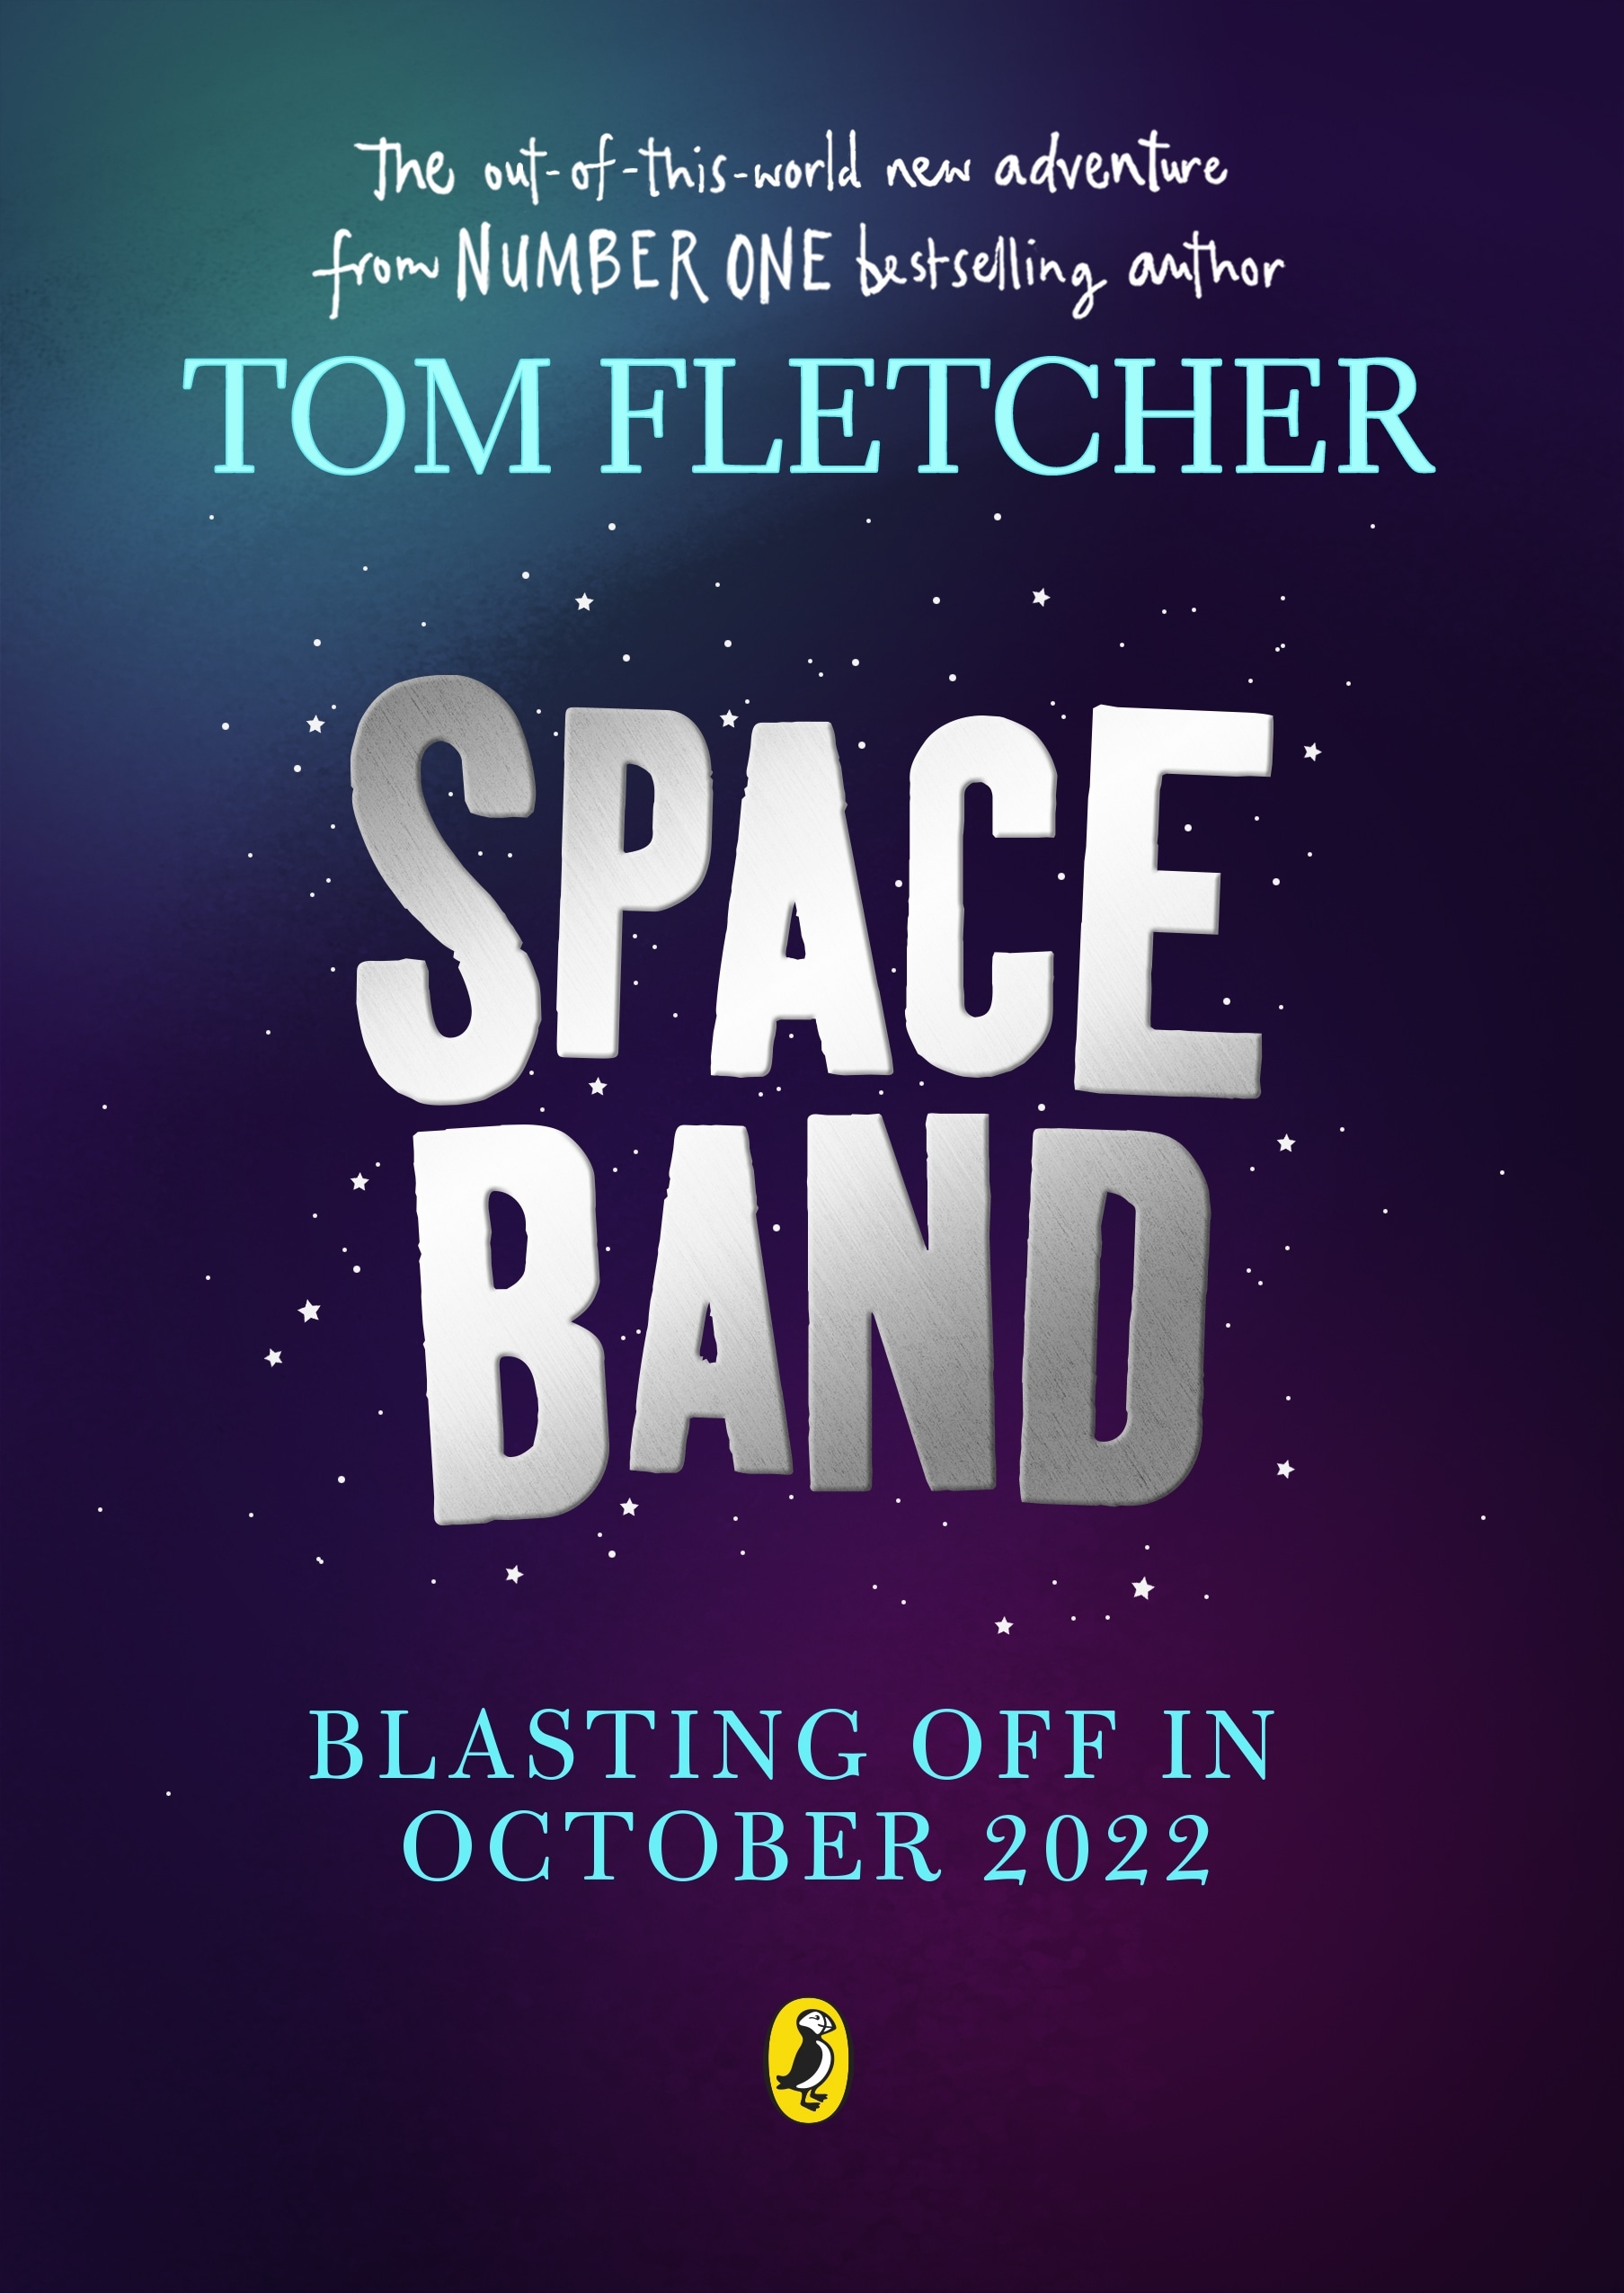 Book “Space Band” by Tom Fletcher — October 13, 2022